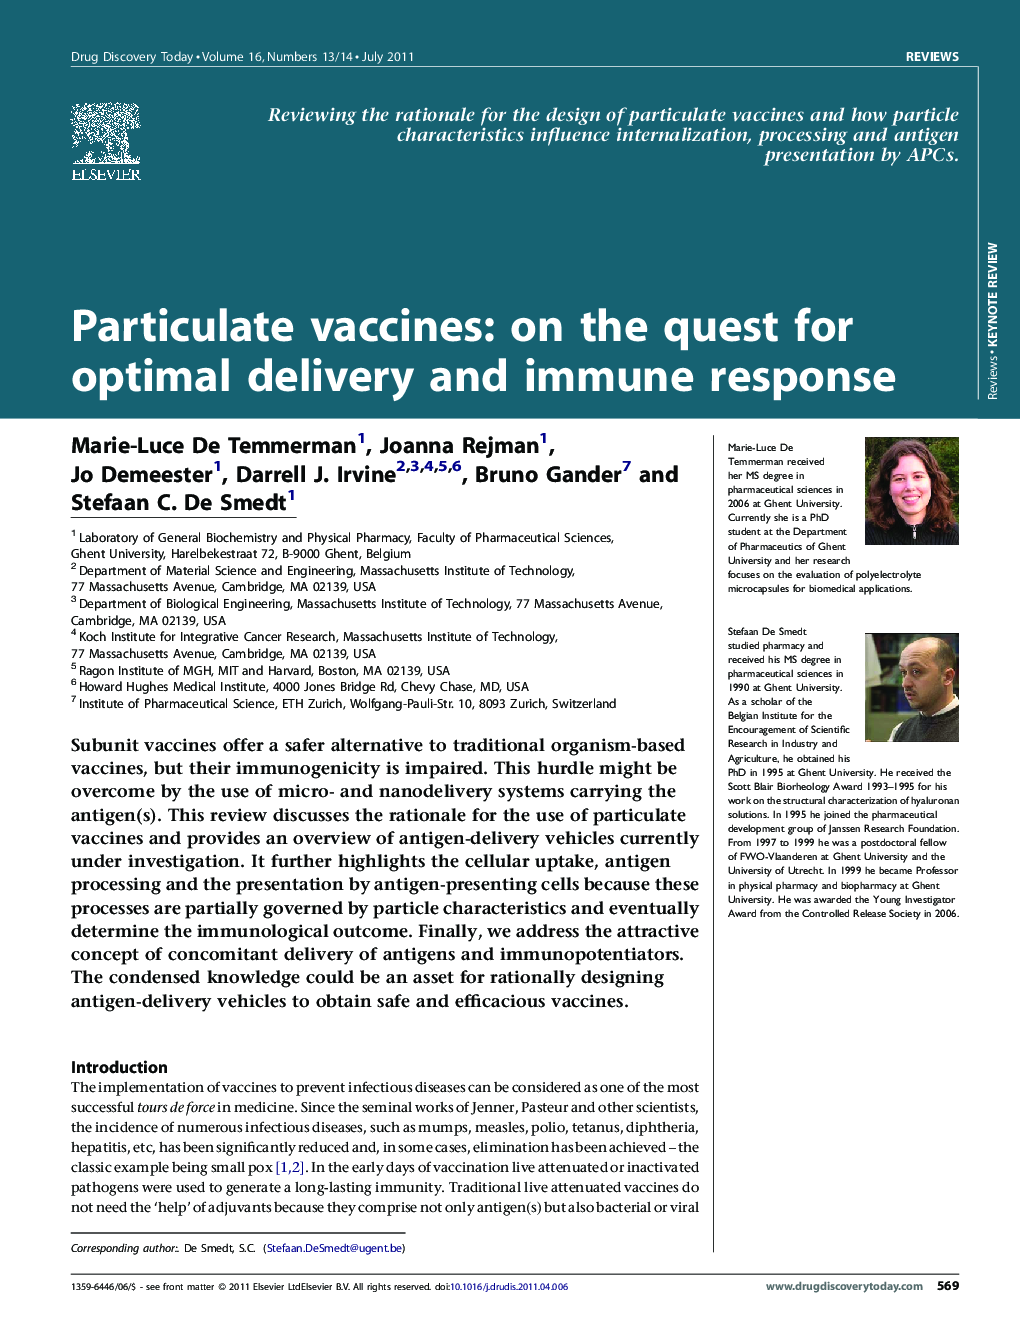 Particulate vaccines: on the quest for optimal delivery and immune response